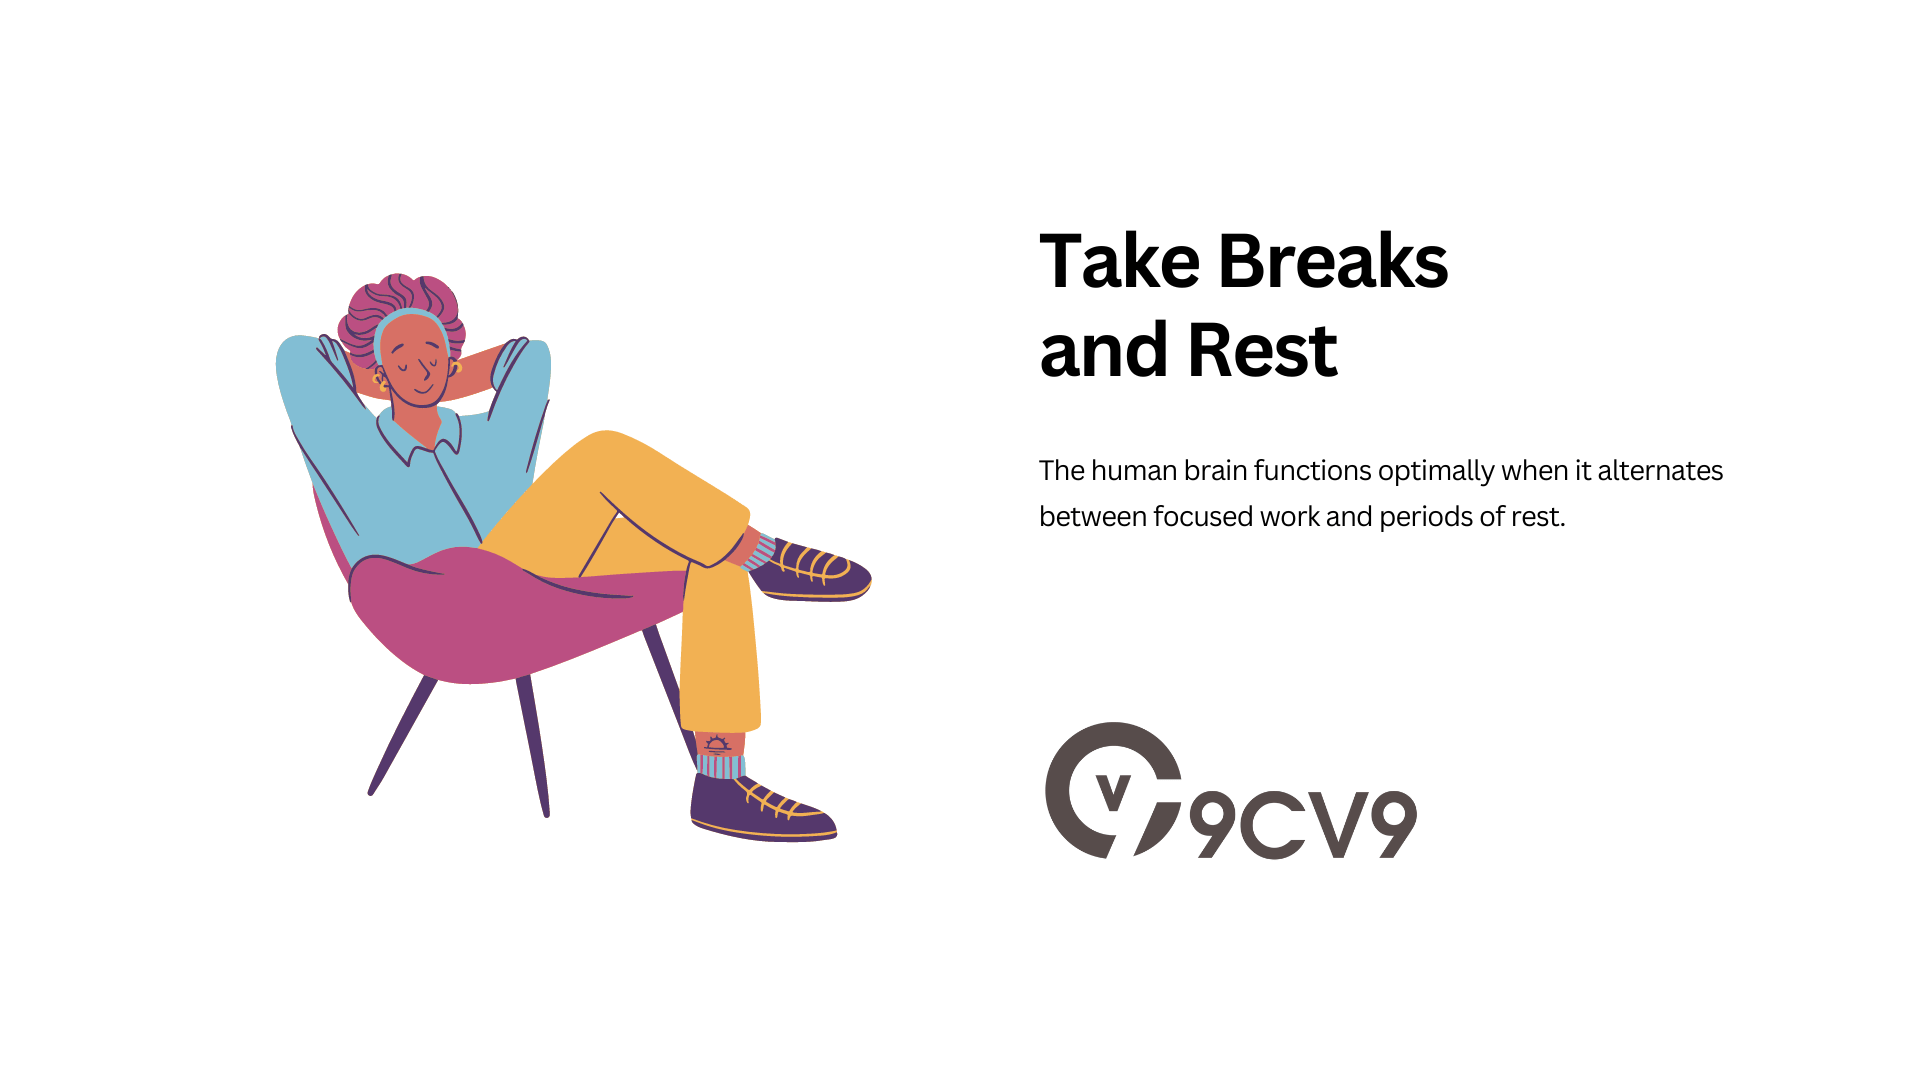 Take Breaks and Rest